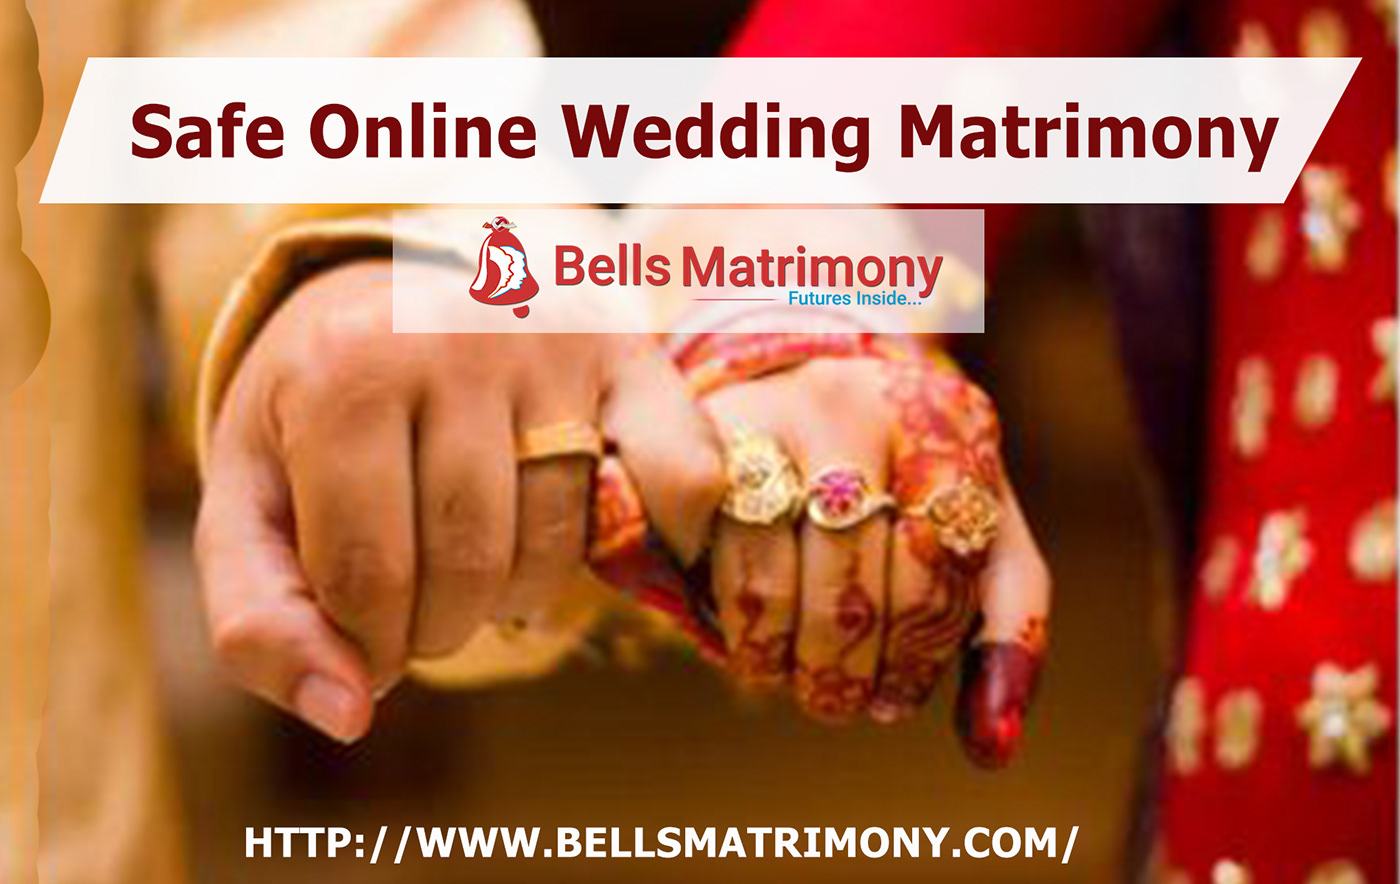 Dindigul Wedding Matrimony website portal Dindigul Online Matchmaking services wedding matrimony for Partner Search search brides in dindigul Online Matrimonials search